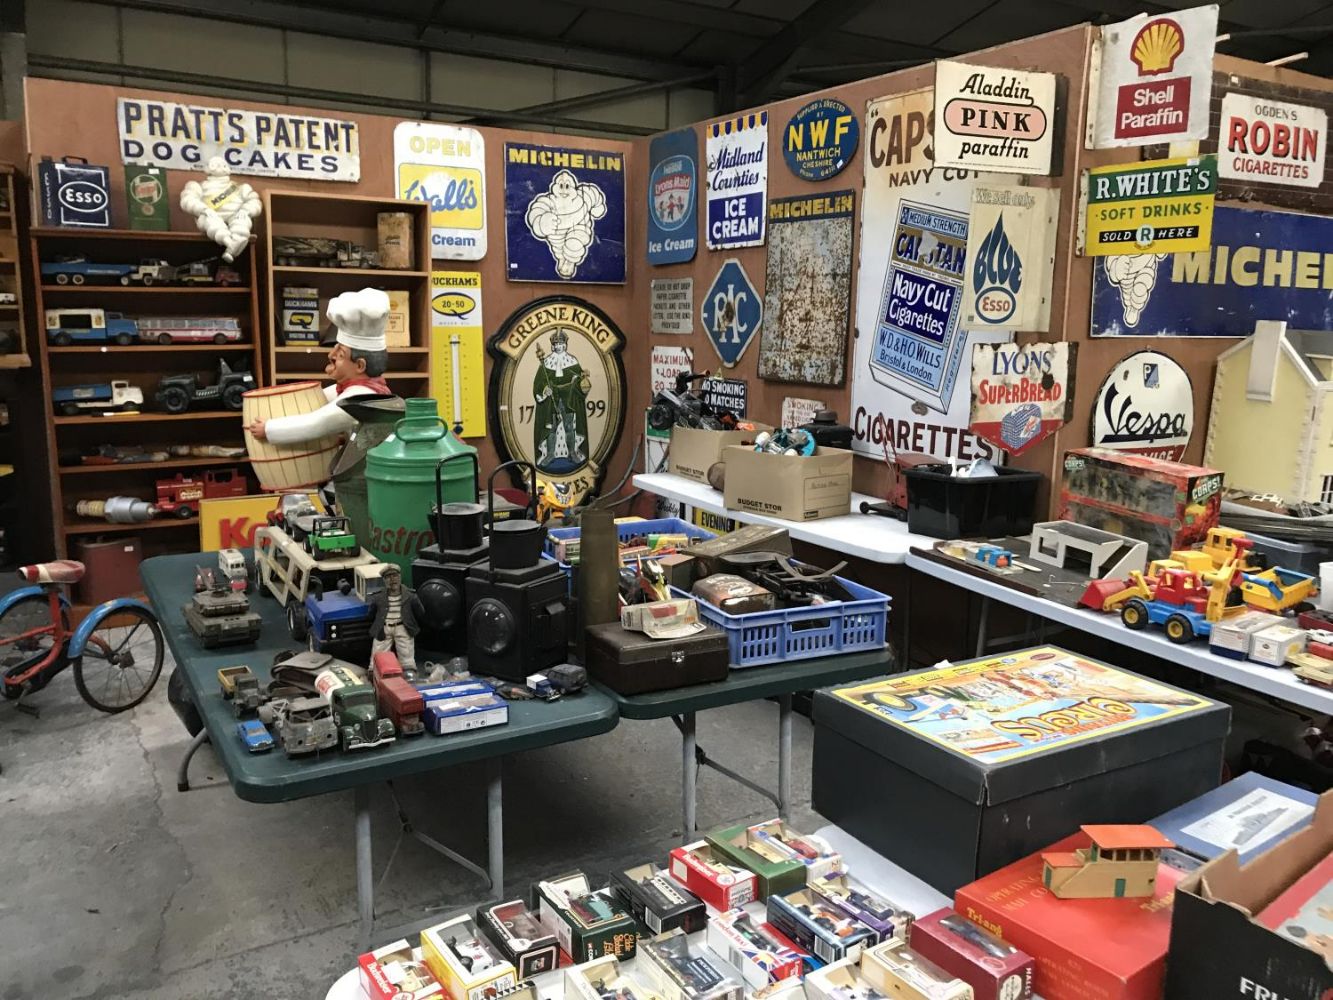 Two Day Auction Of Collectables, Antiques, Furniture, Vintage Items - with a special section for Sporting Memorabilia and Northern Soul records